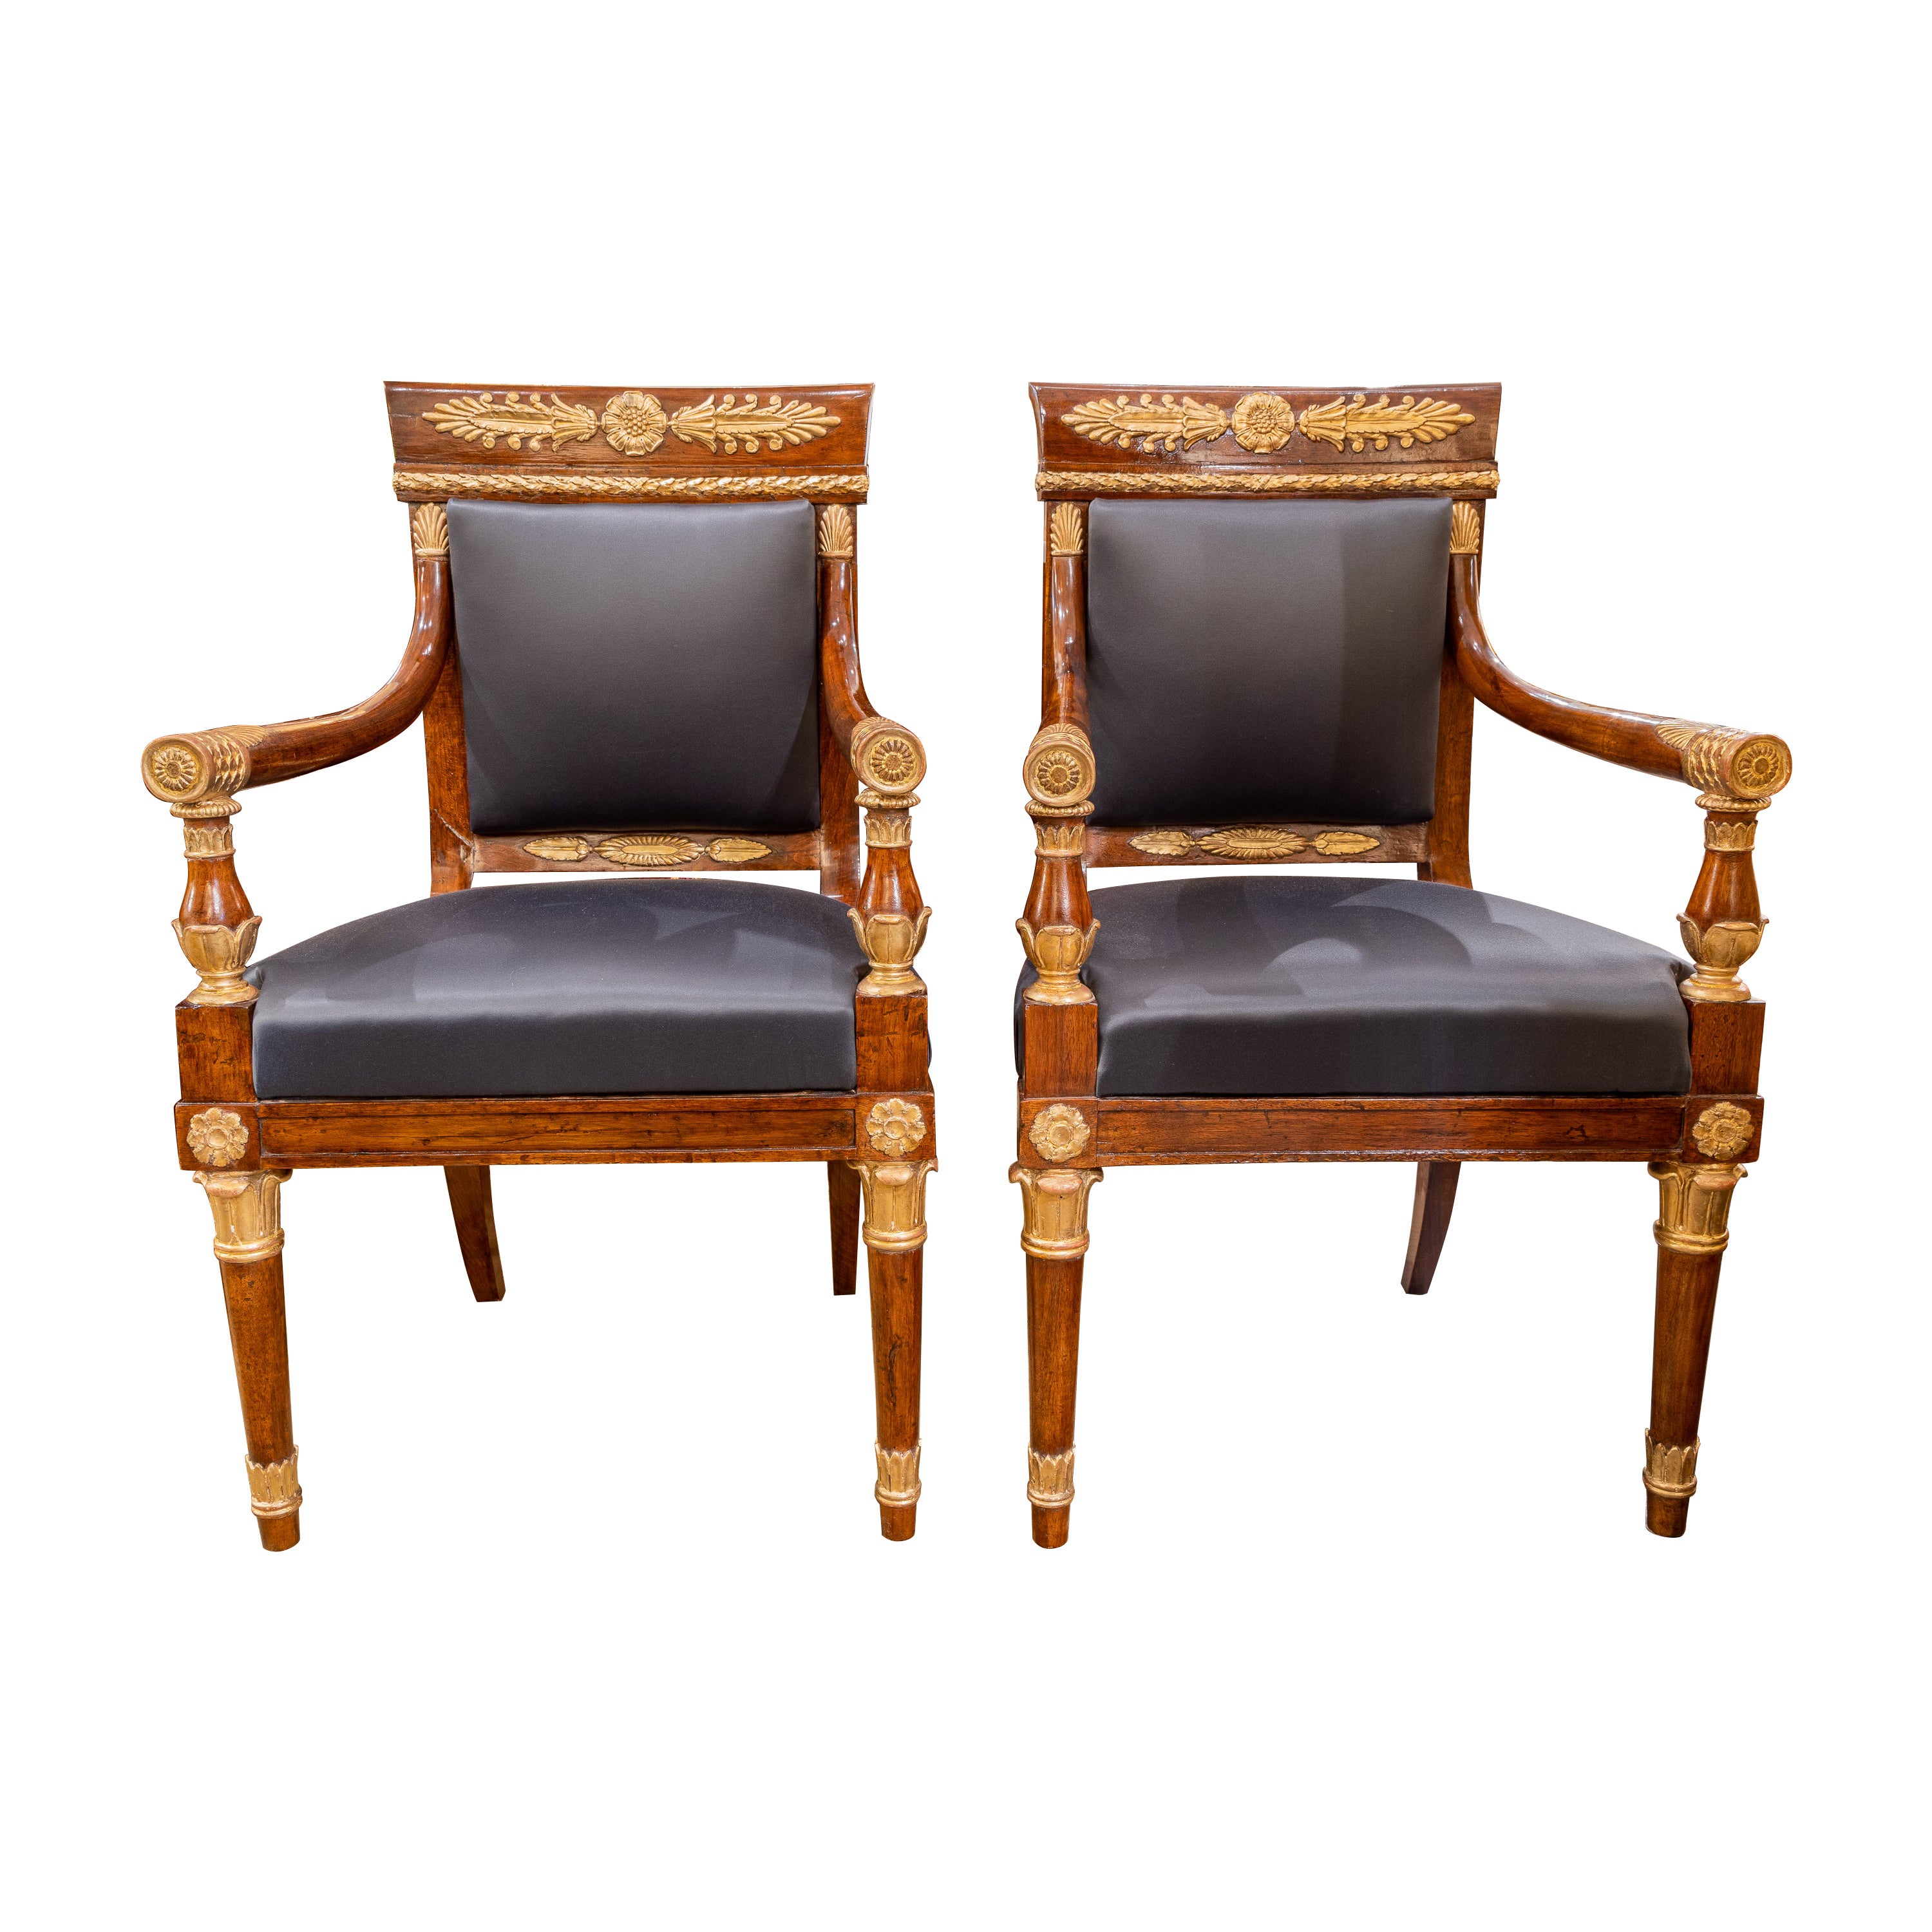 Very Fine and Rare Pair of Early 19th C Italian Empire Carved and Gilt Chairs For Sale